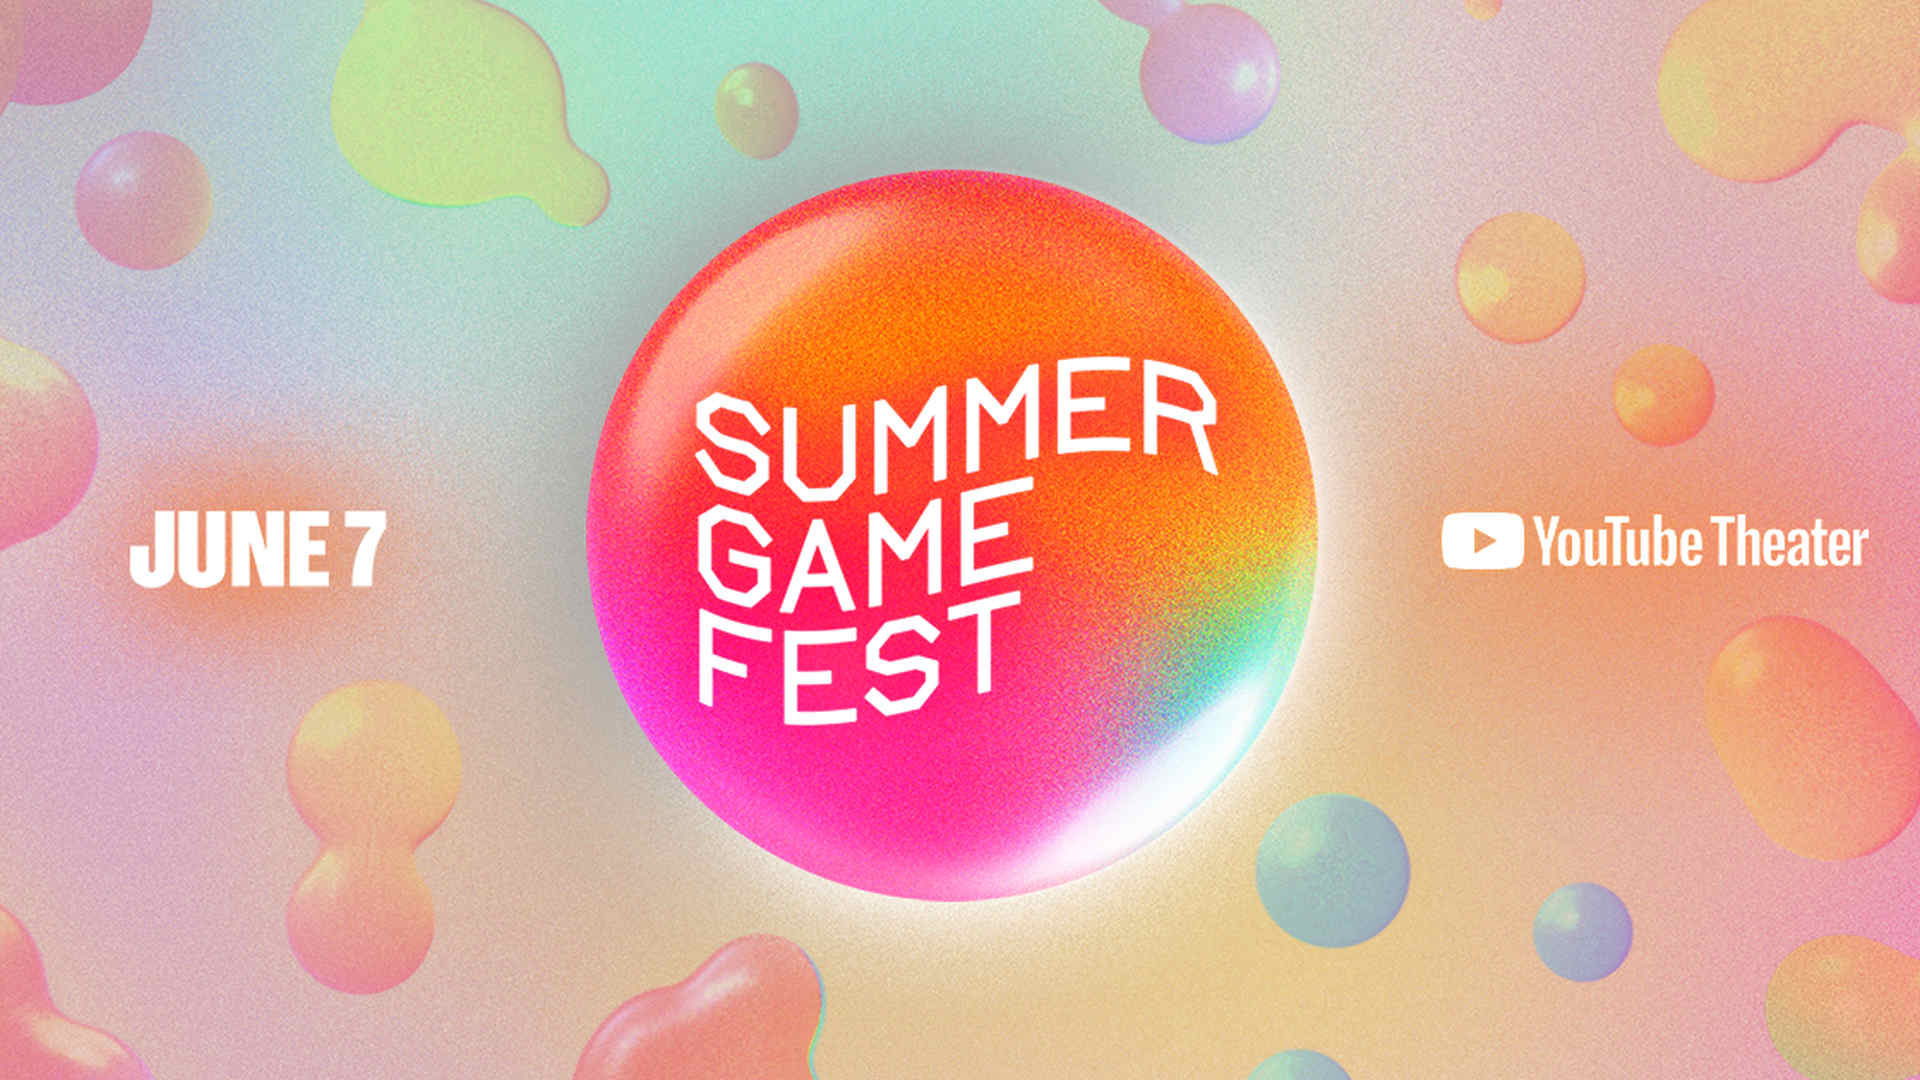  Summer Games Fest confirms GTA 6 publisher, Xbox, and PlayStation will all be in attendance during next month's show 